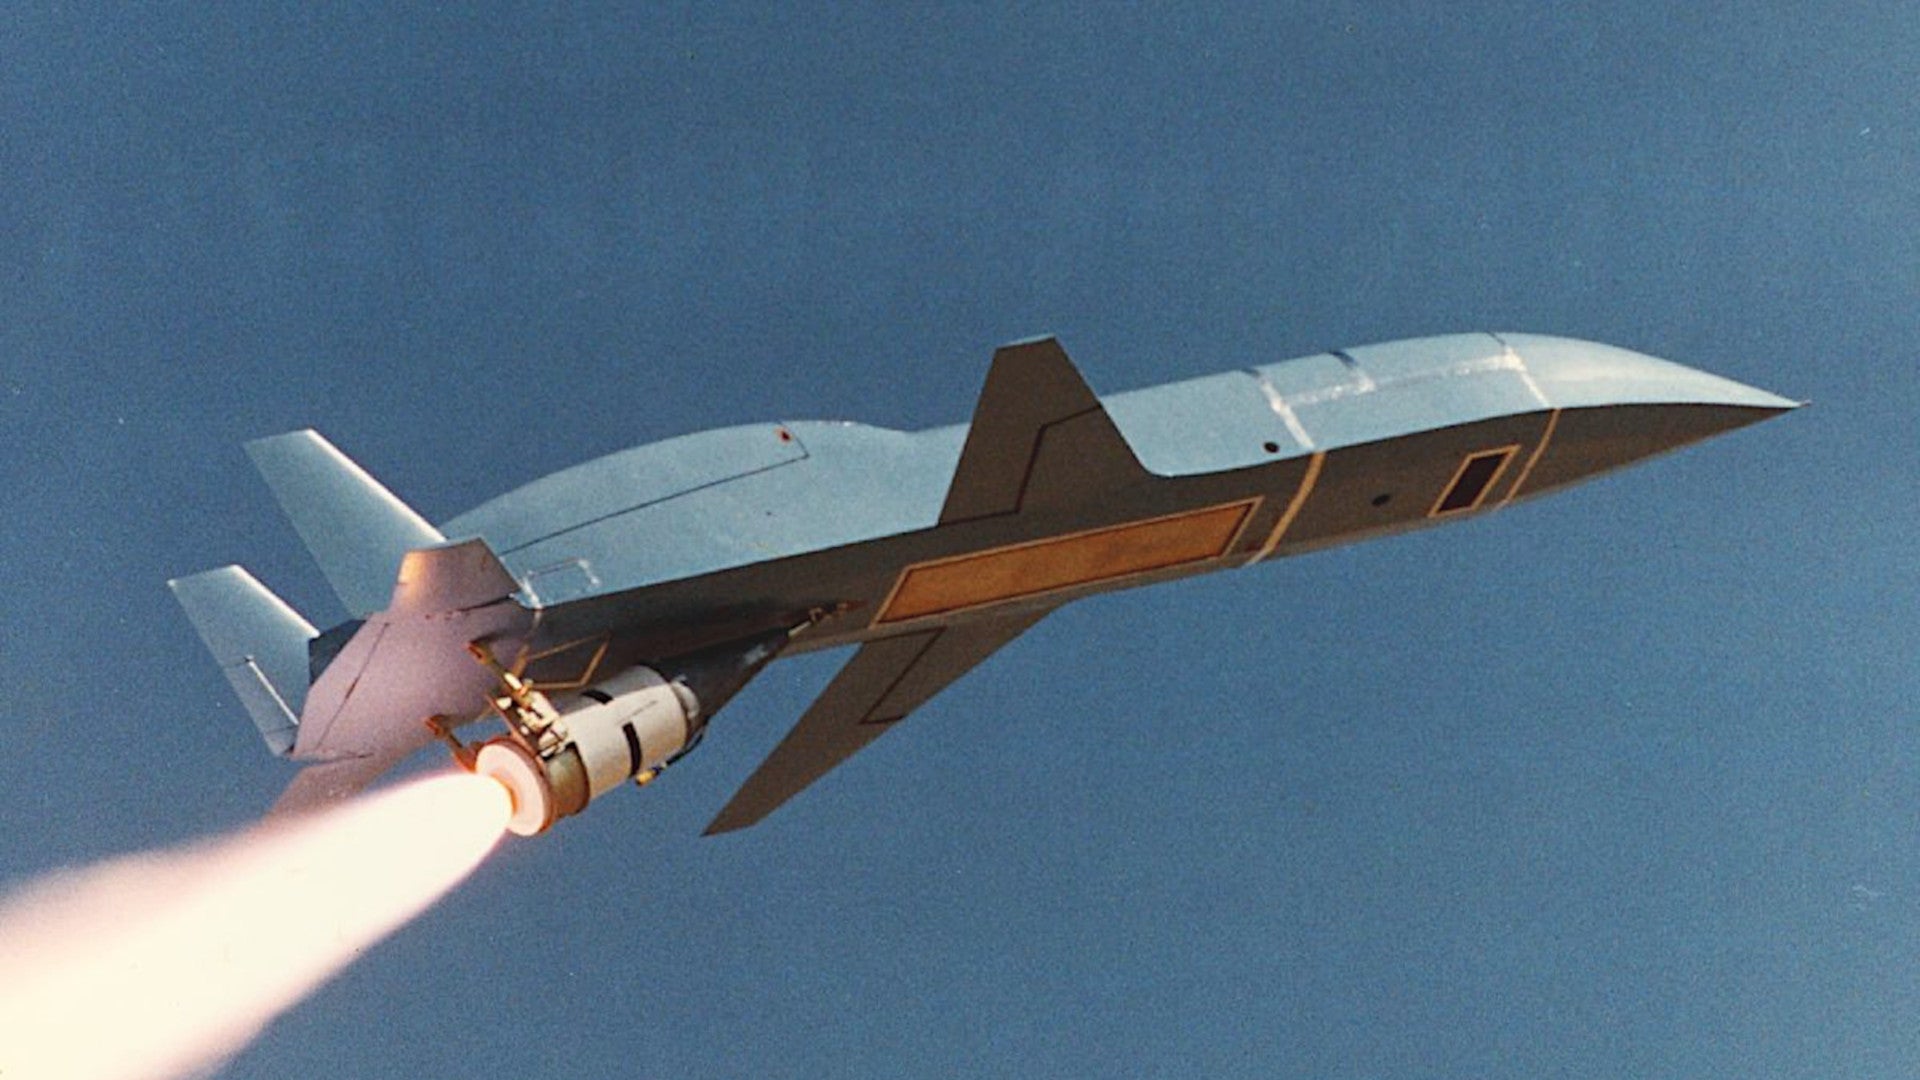 The U.S. Sold This Unique Stealth Drone Called ‘Scarab’ To Egypt In The 1980s